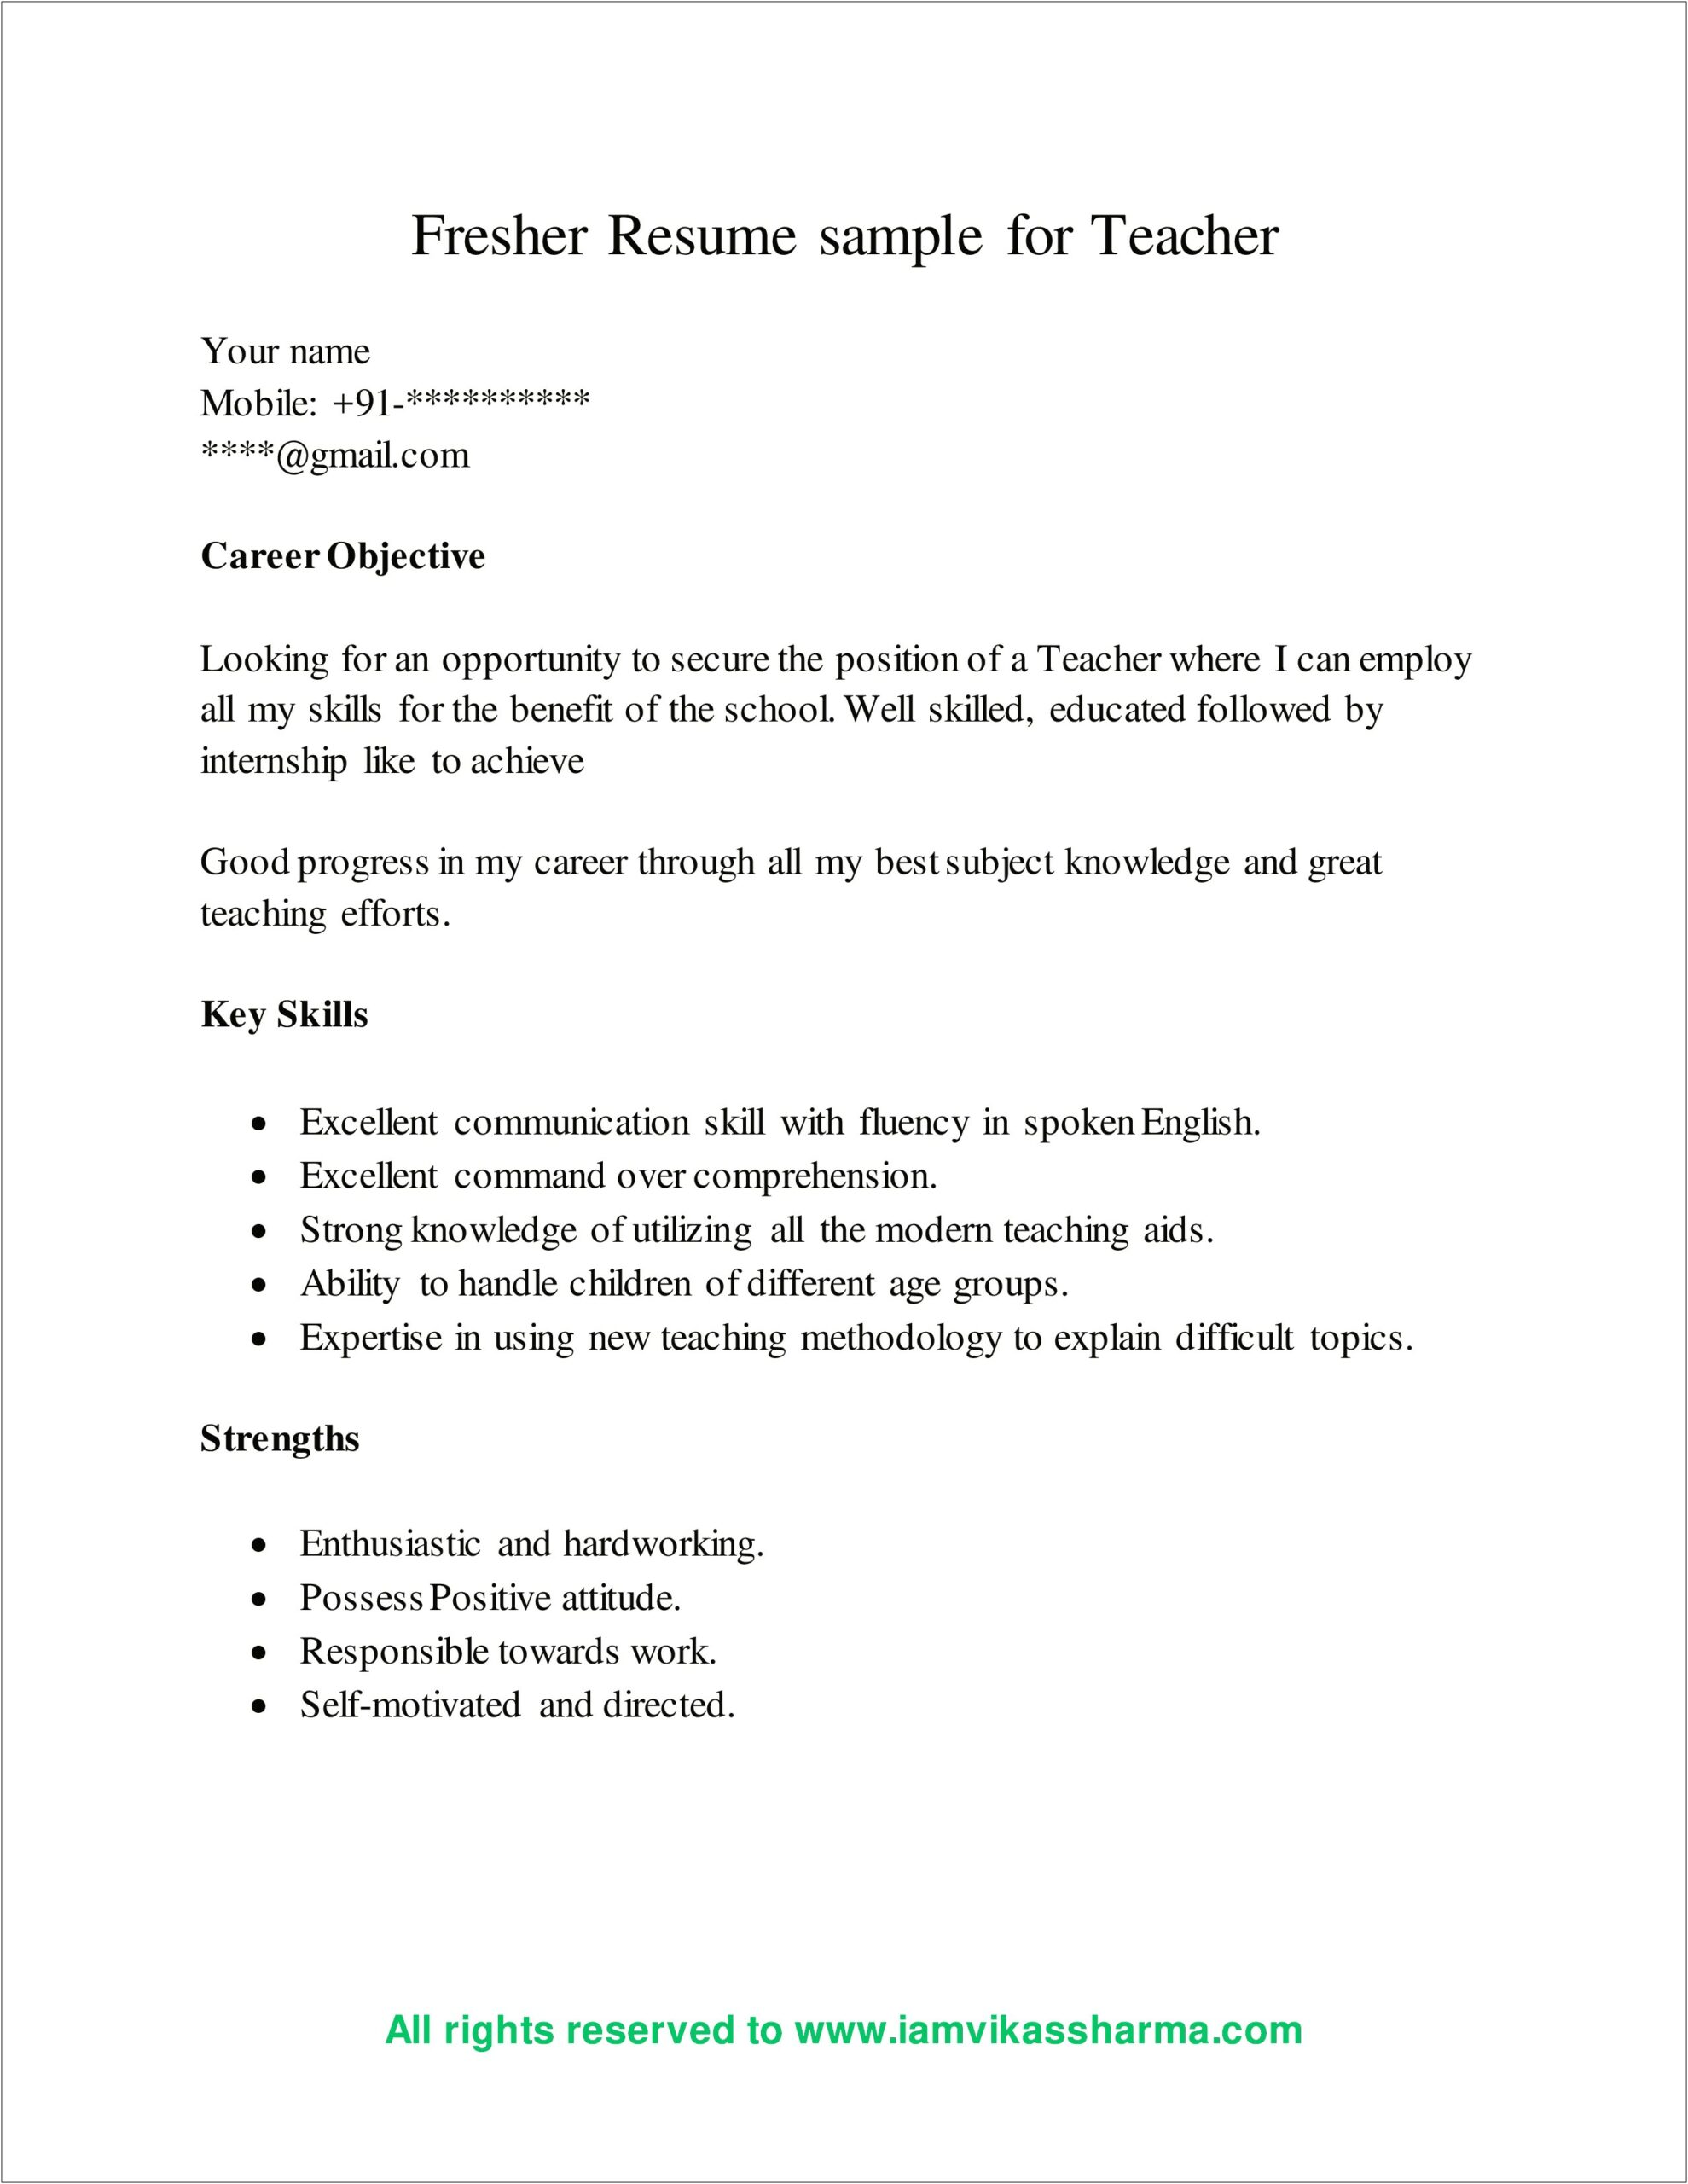 Key Skills And Strengths For A Resume